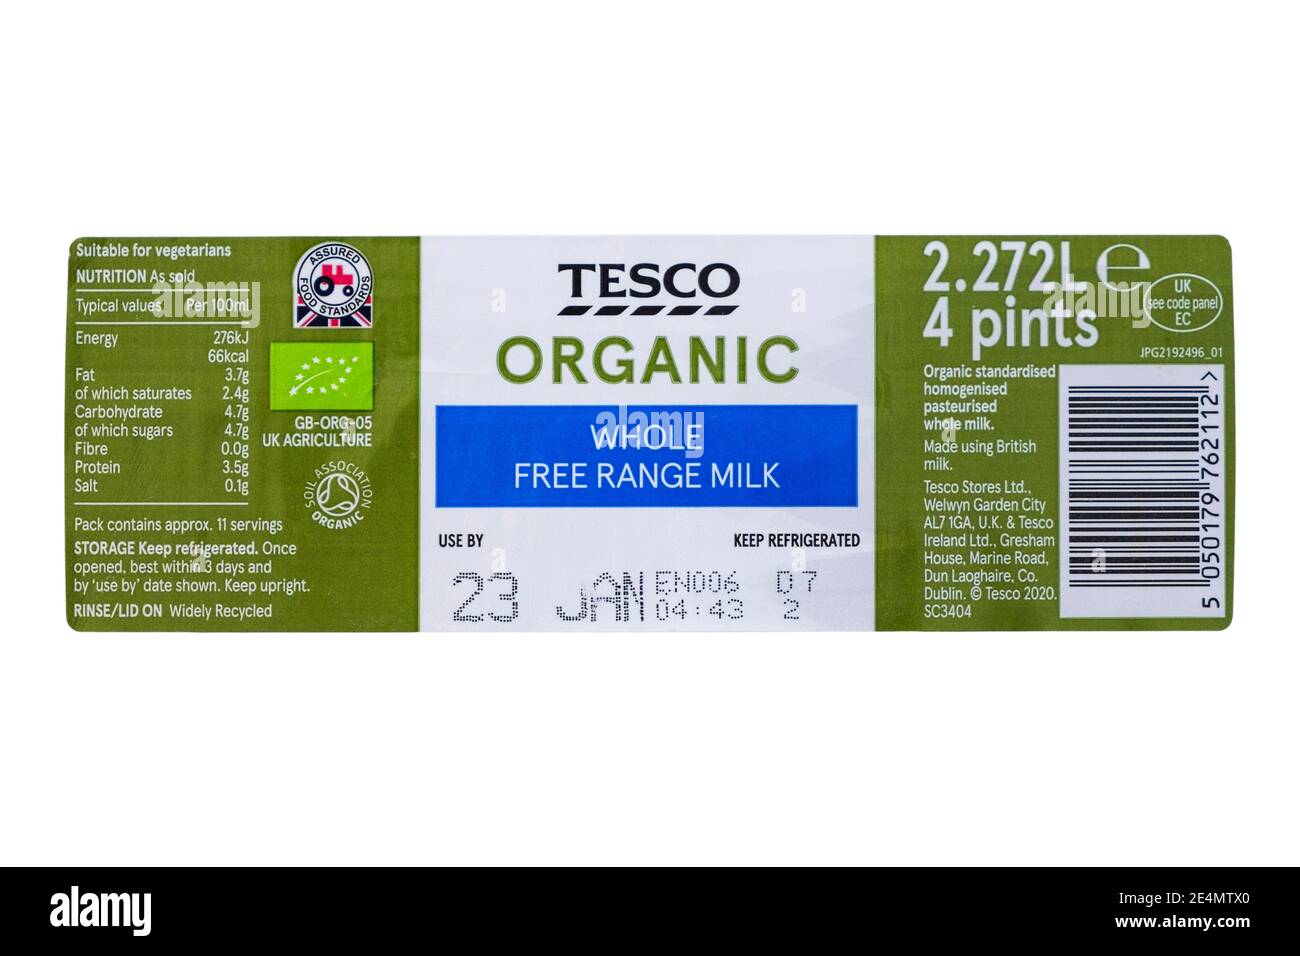 Tesco Organic milk bottle food label for free range whole milk with nutrition information and bar code isolated on transparent background. UK Britain Stock Photo